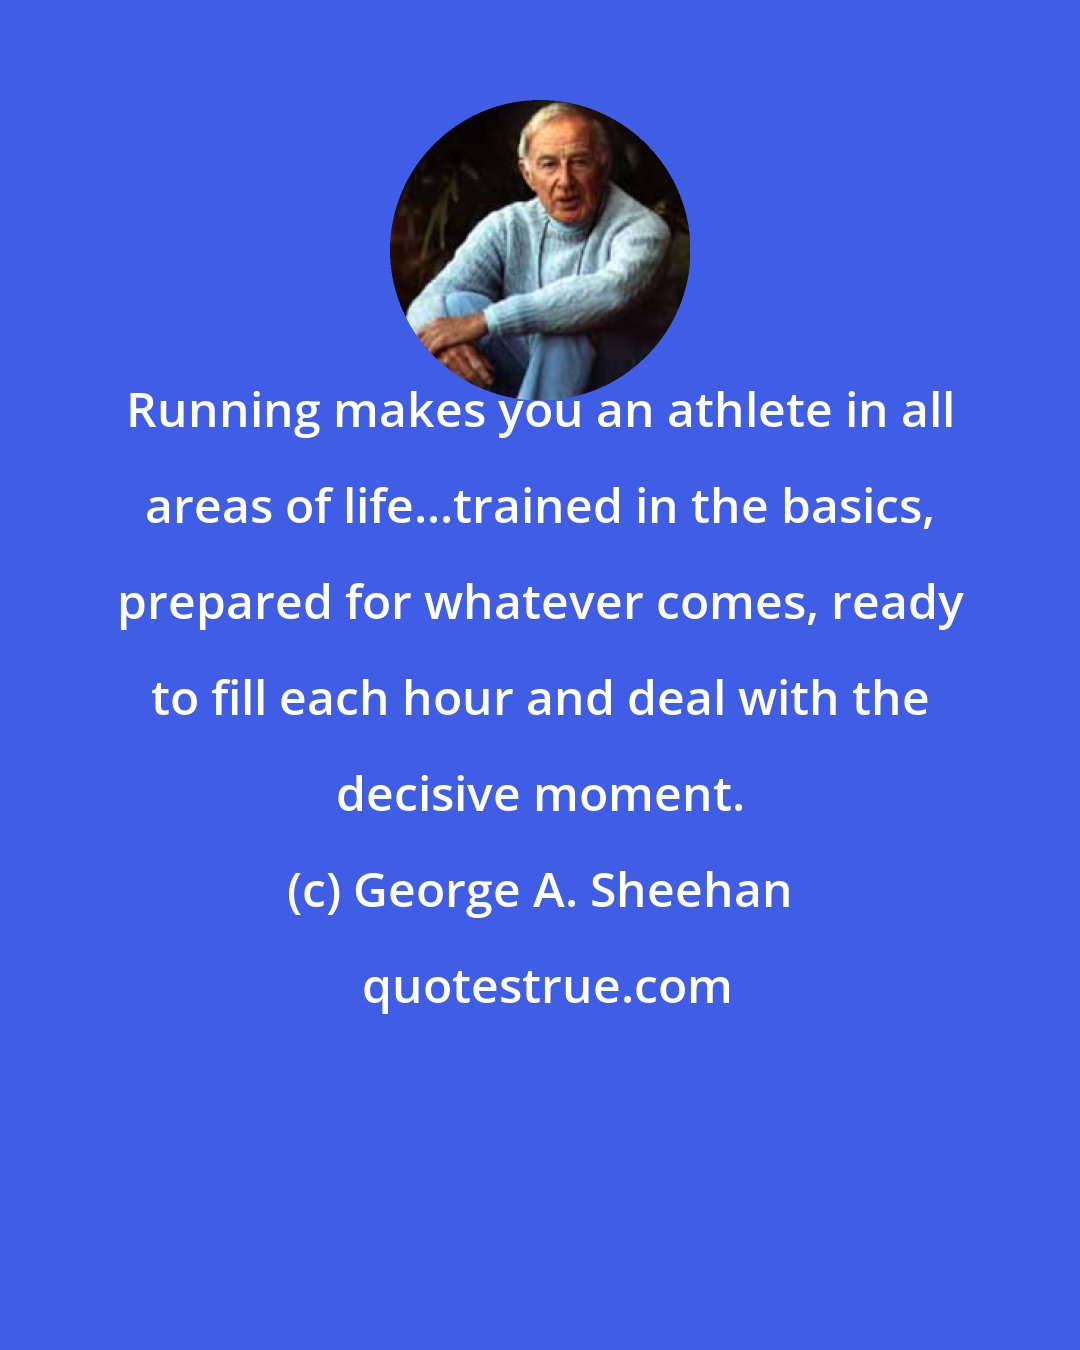 George A. Sheehan: Running makes you an athlete in all areas of life...trained in the basics, prepared for whatever comes, ready to fill each hour and deal with the decisive moment.